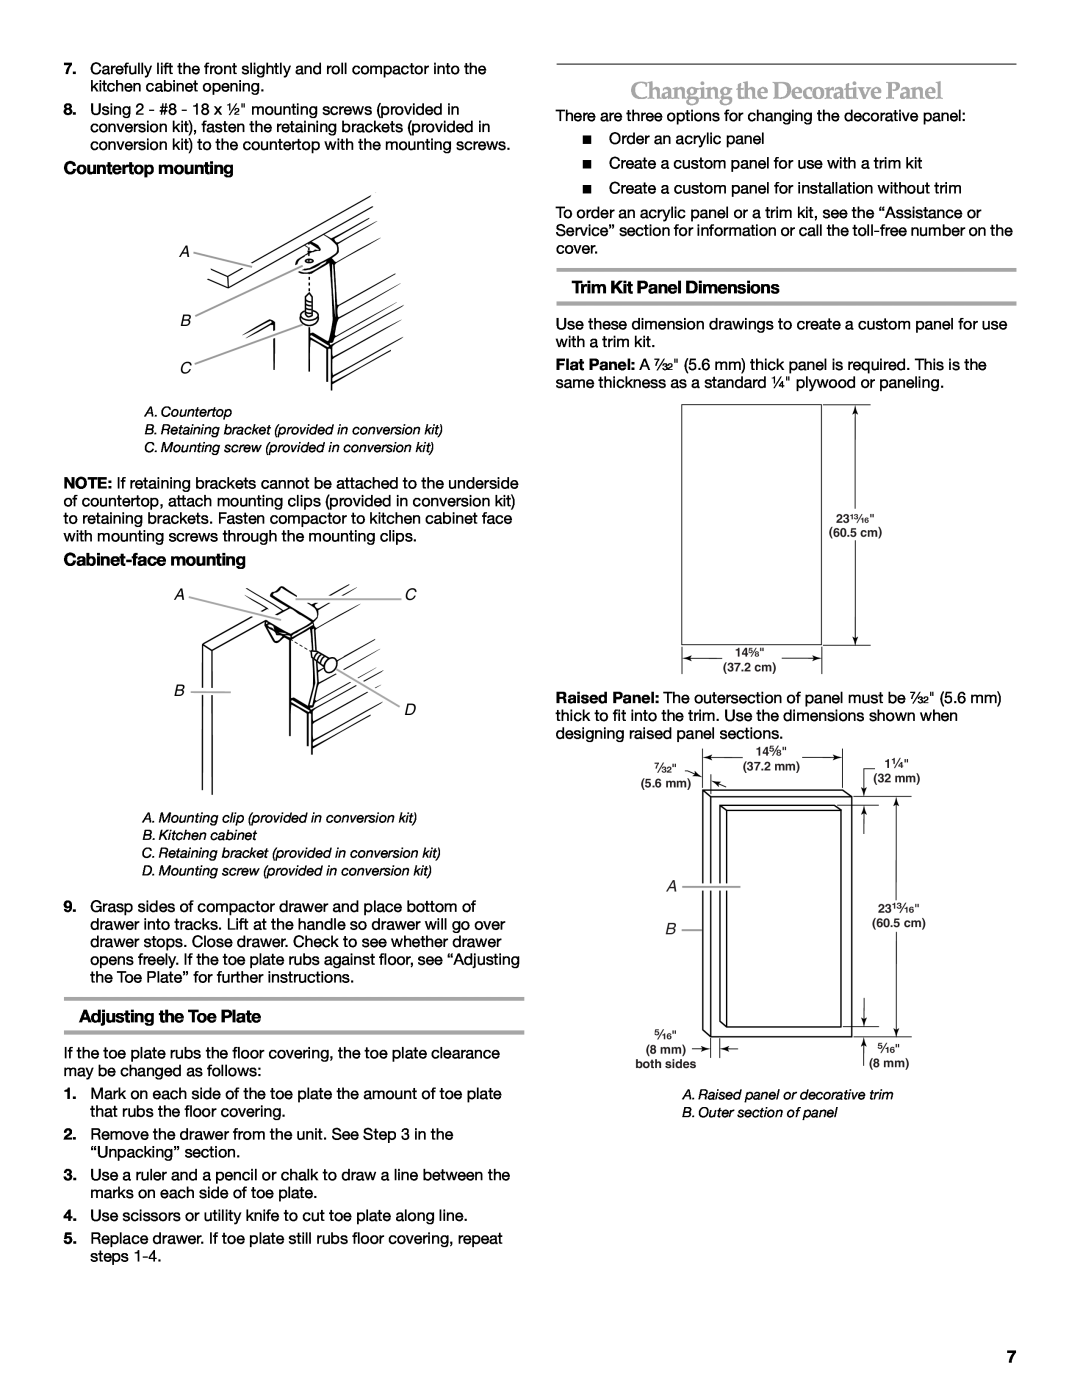 KitchenAid 9871780B Changingthe Decorative Panel, Countertop mounting, Cabinet-face mounting, Trim Kit Panel Dimensions 